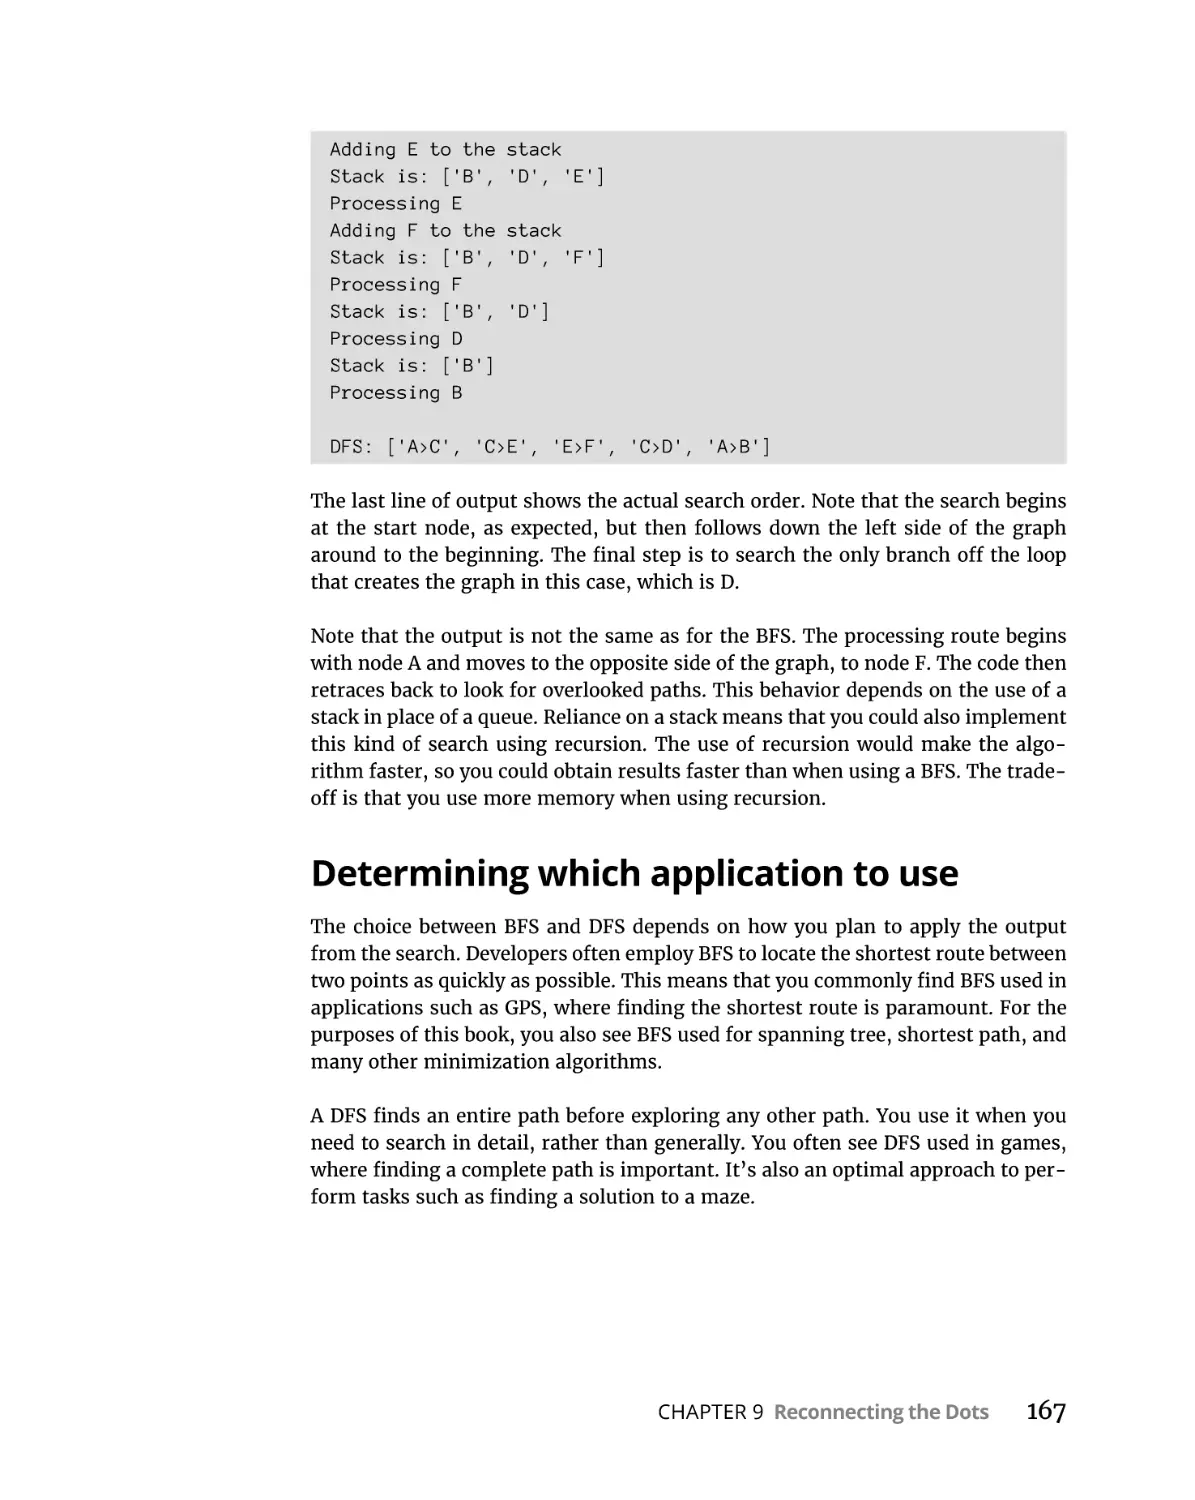 Determining which application to use